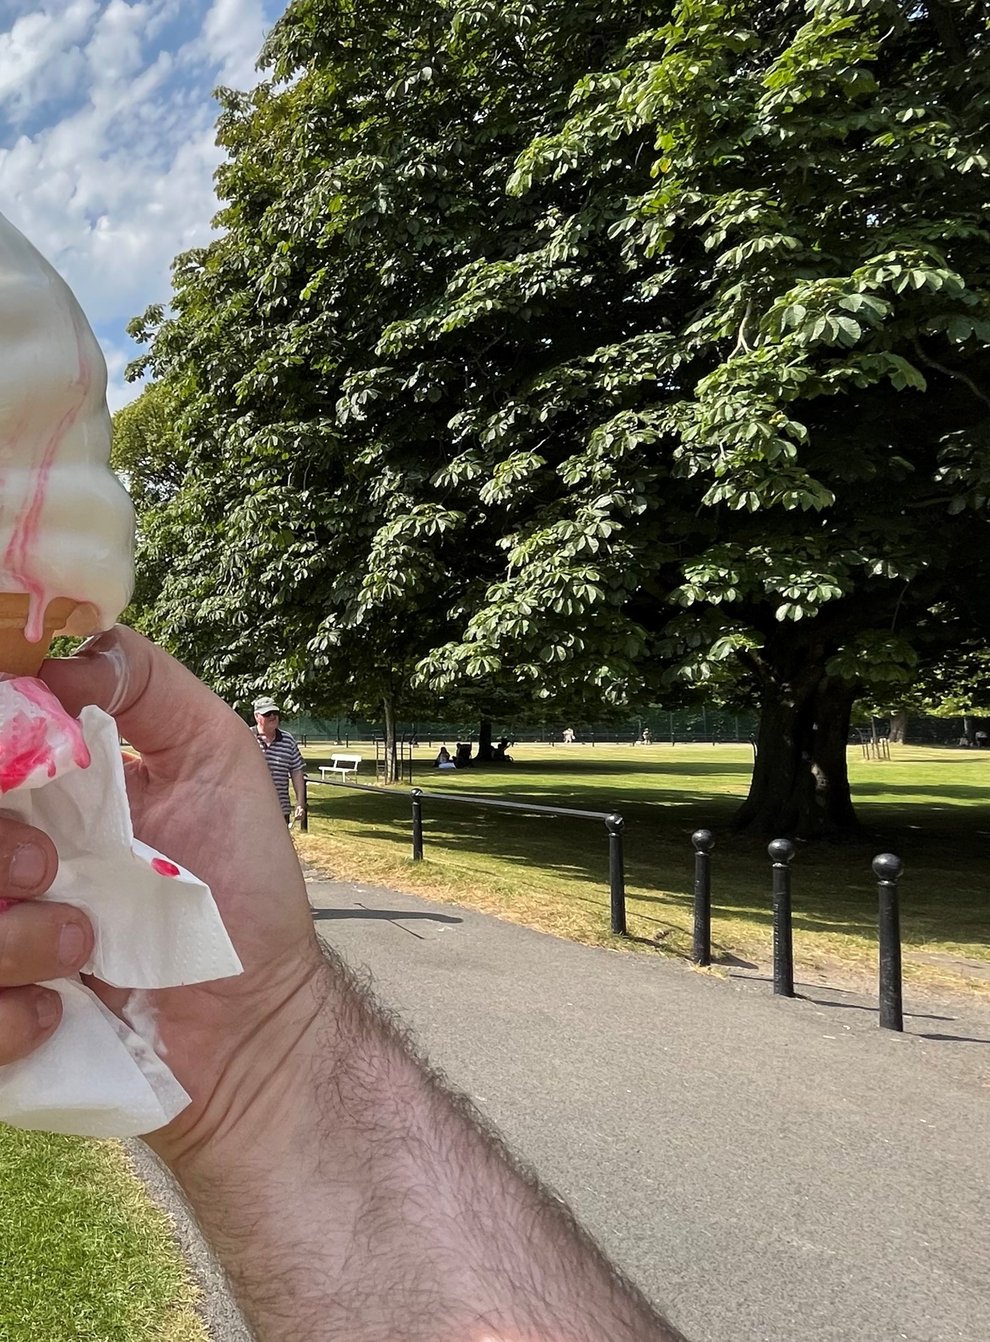 An ice cream melts in the heat at Phoenix Park in Dublin (PA)